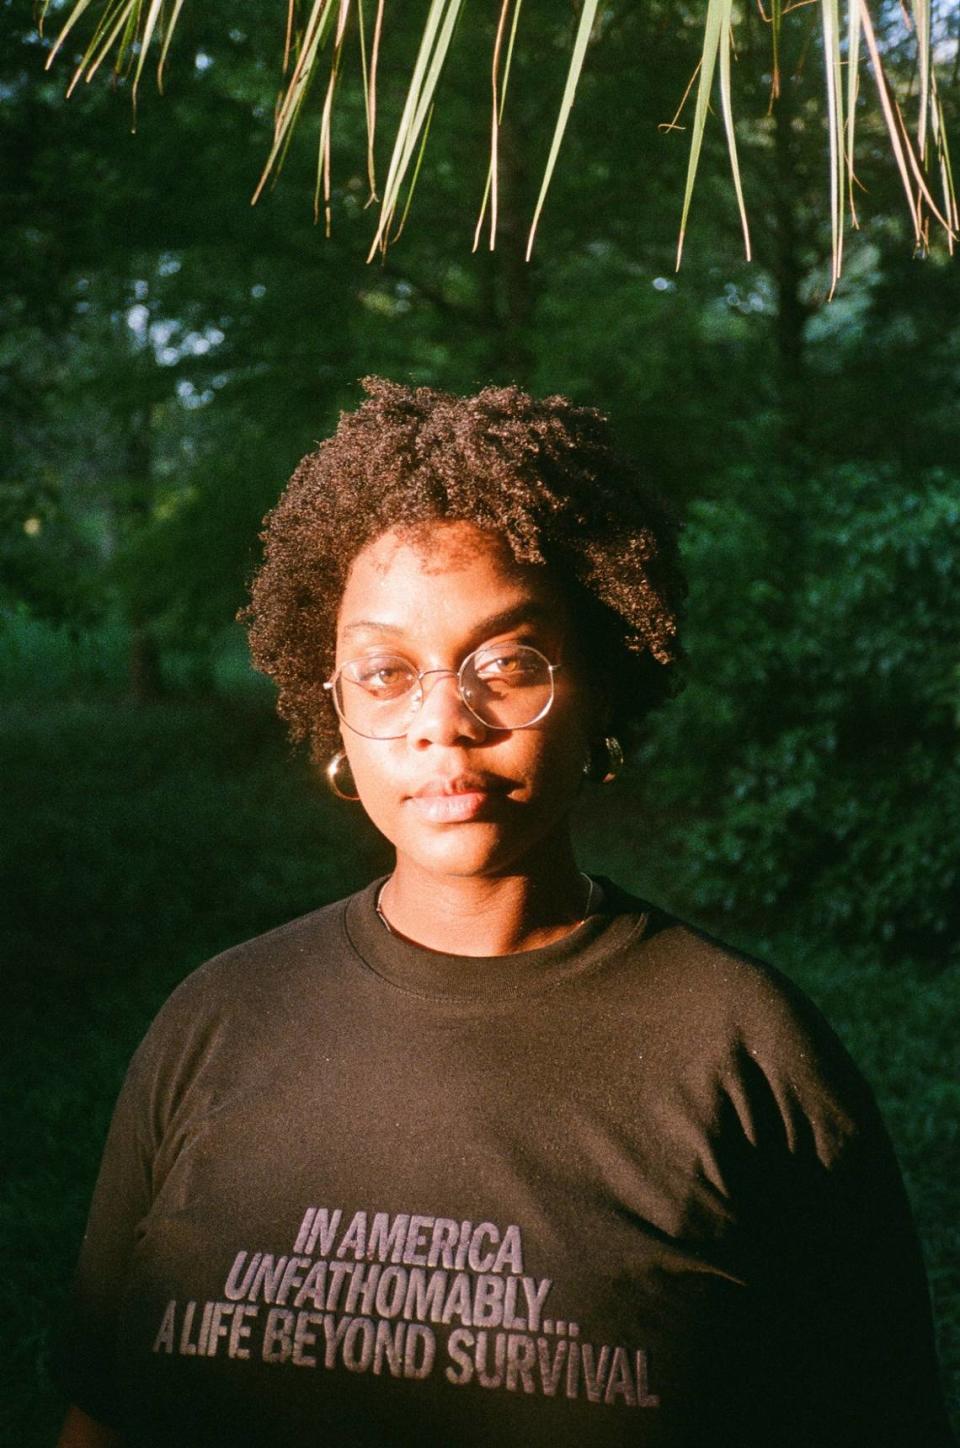 Monica Sorelle is an award-winning Miami filmmaker. She directed “Mountains,” a film about gentrification in Little Haiti. This year she will work as Third Horizon Film Festival’s managing director.